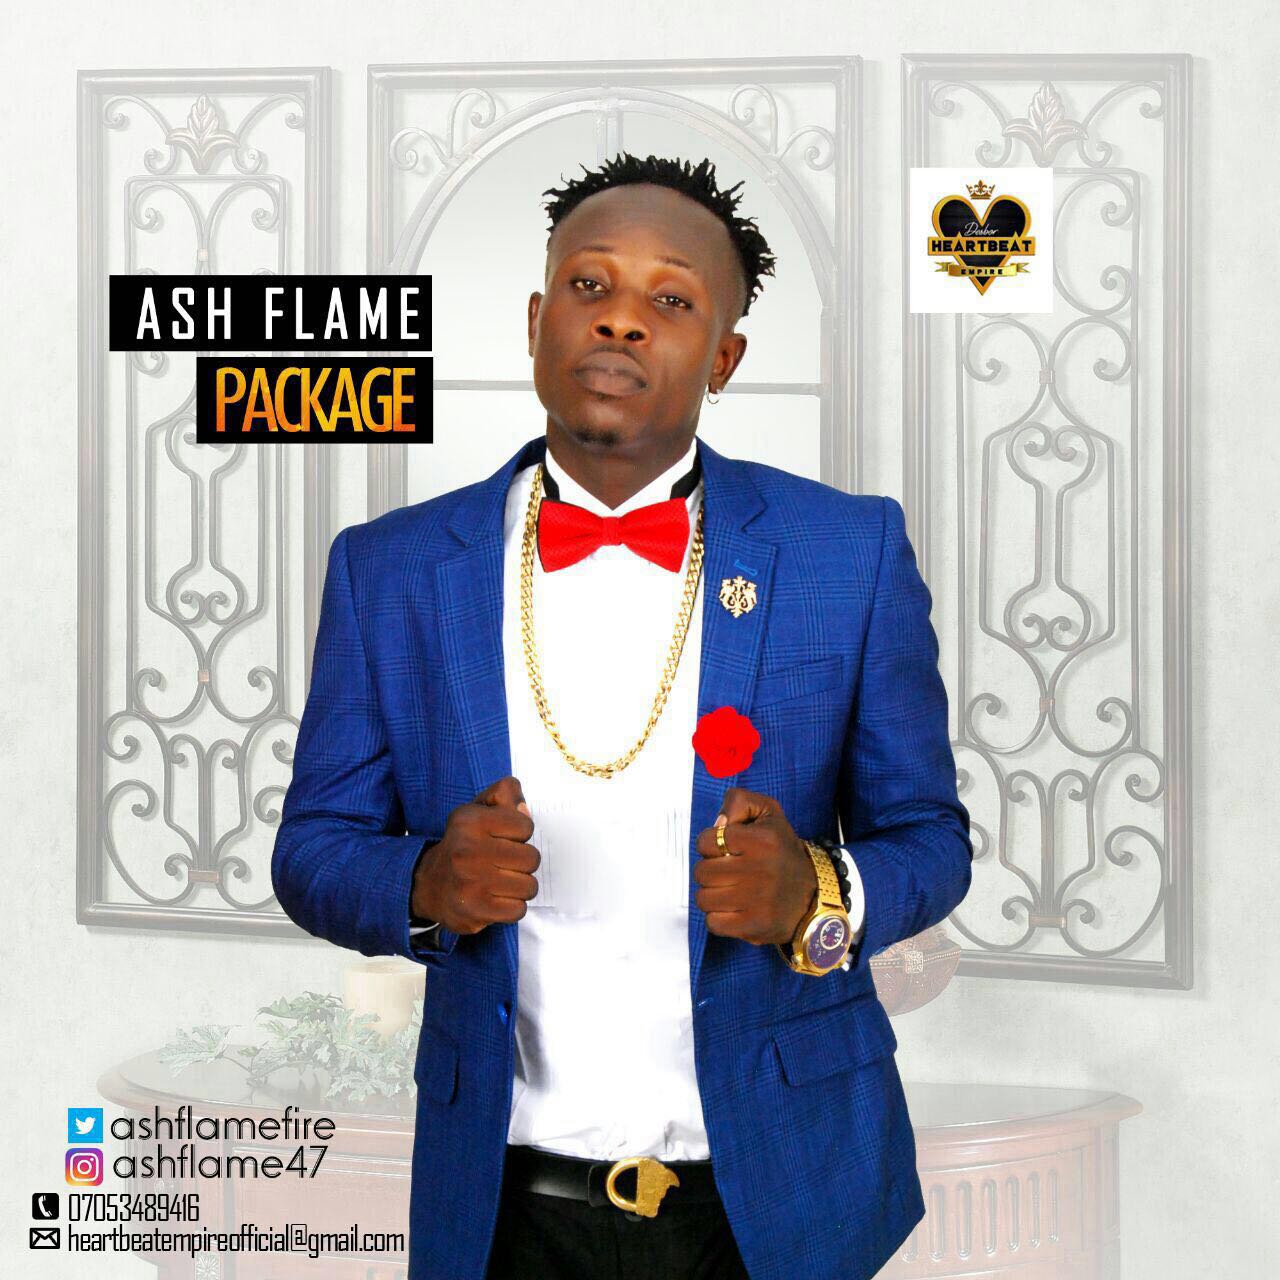 Ash Flame – Package